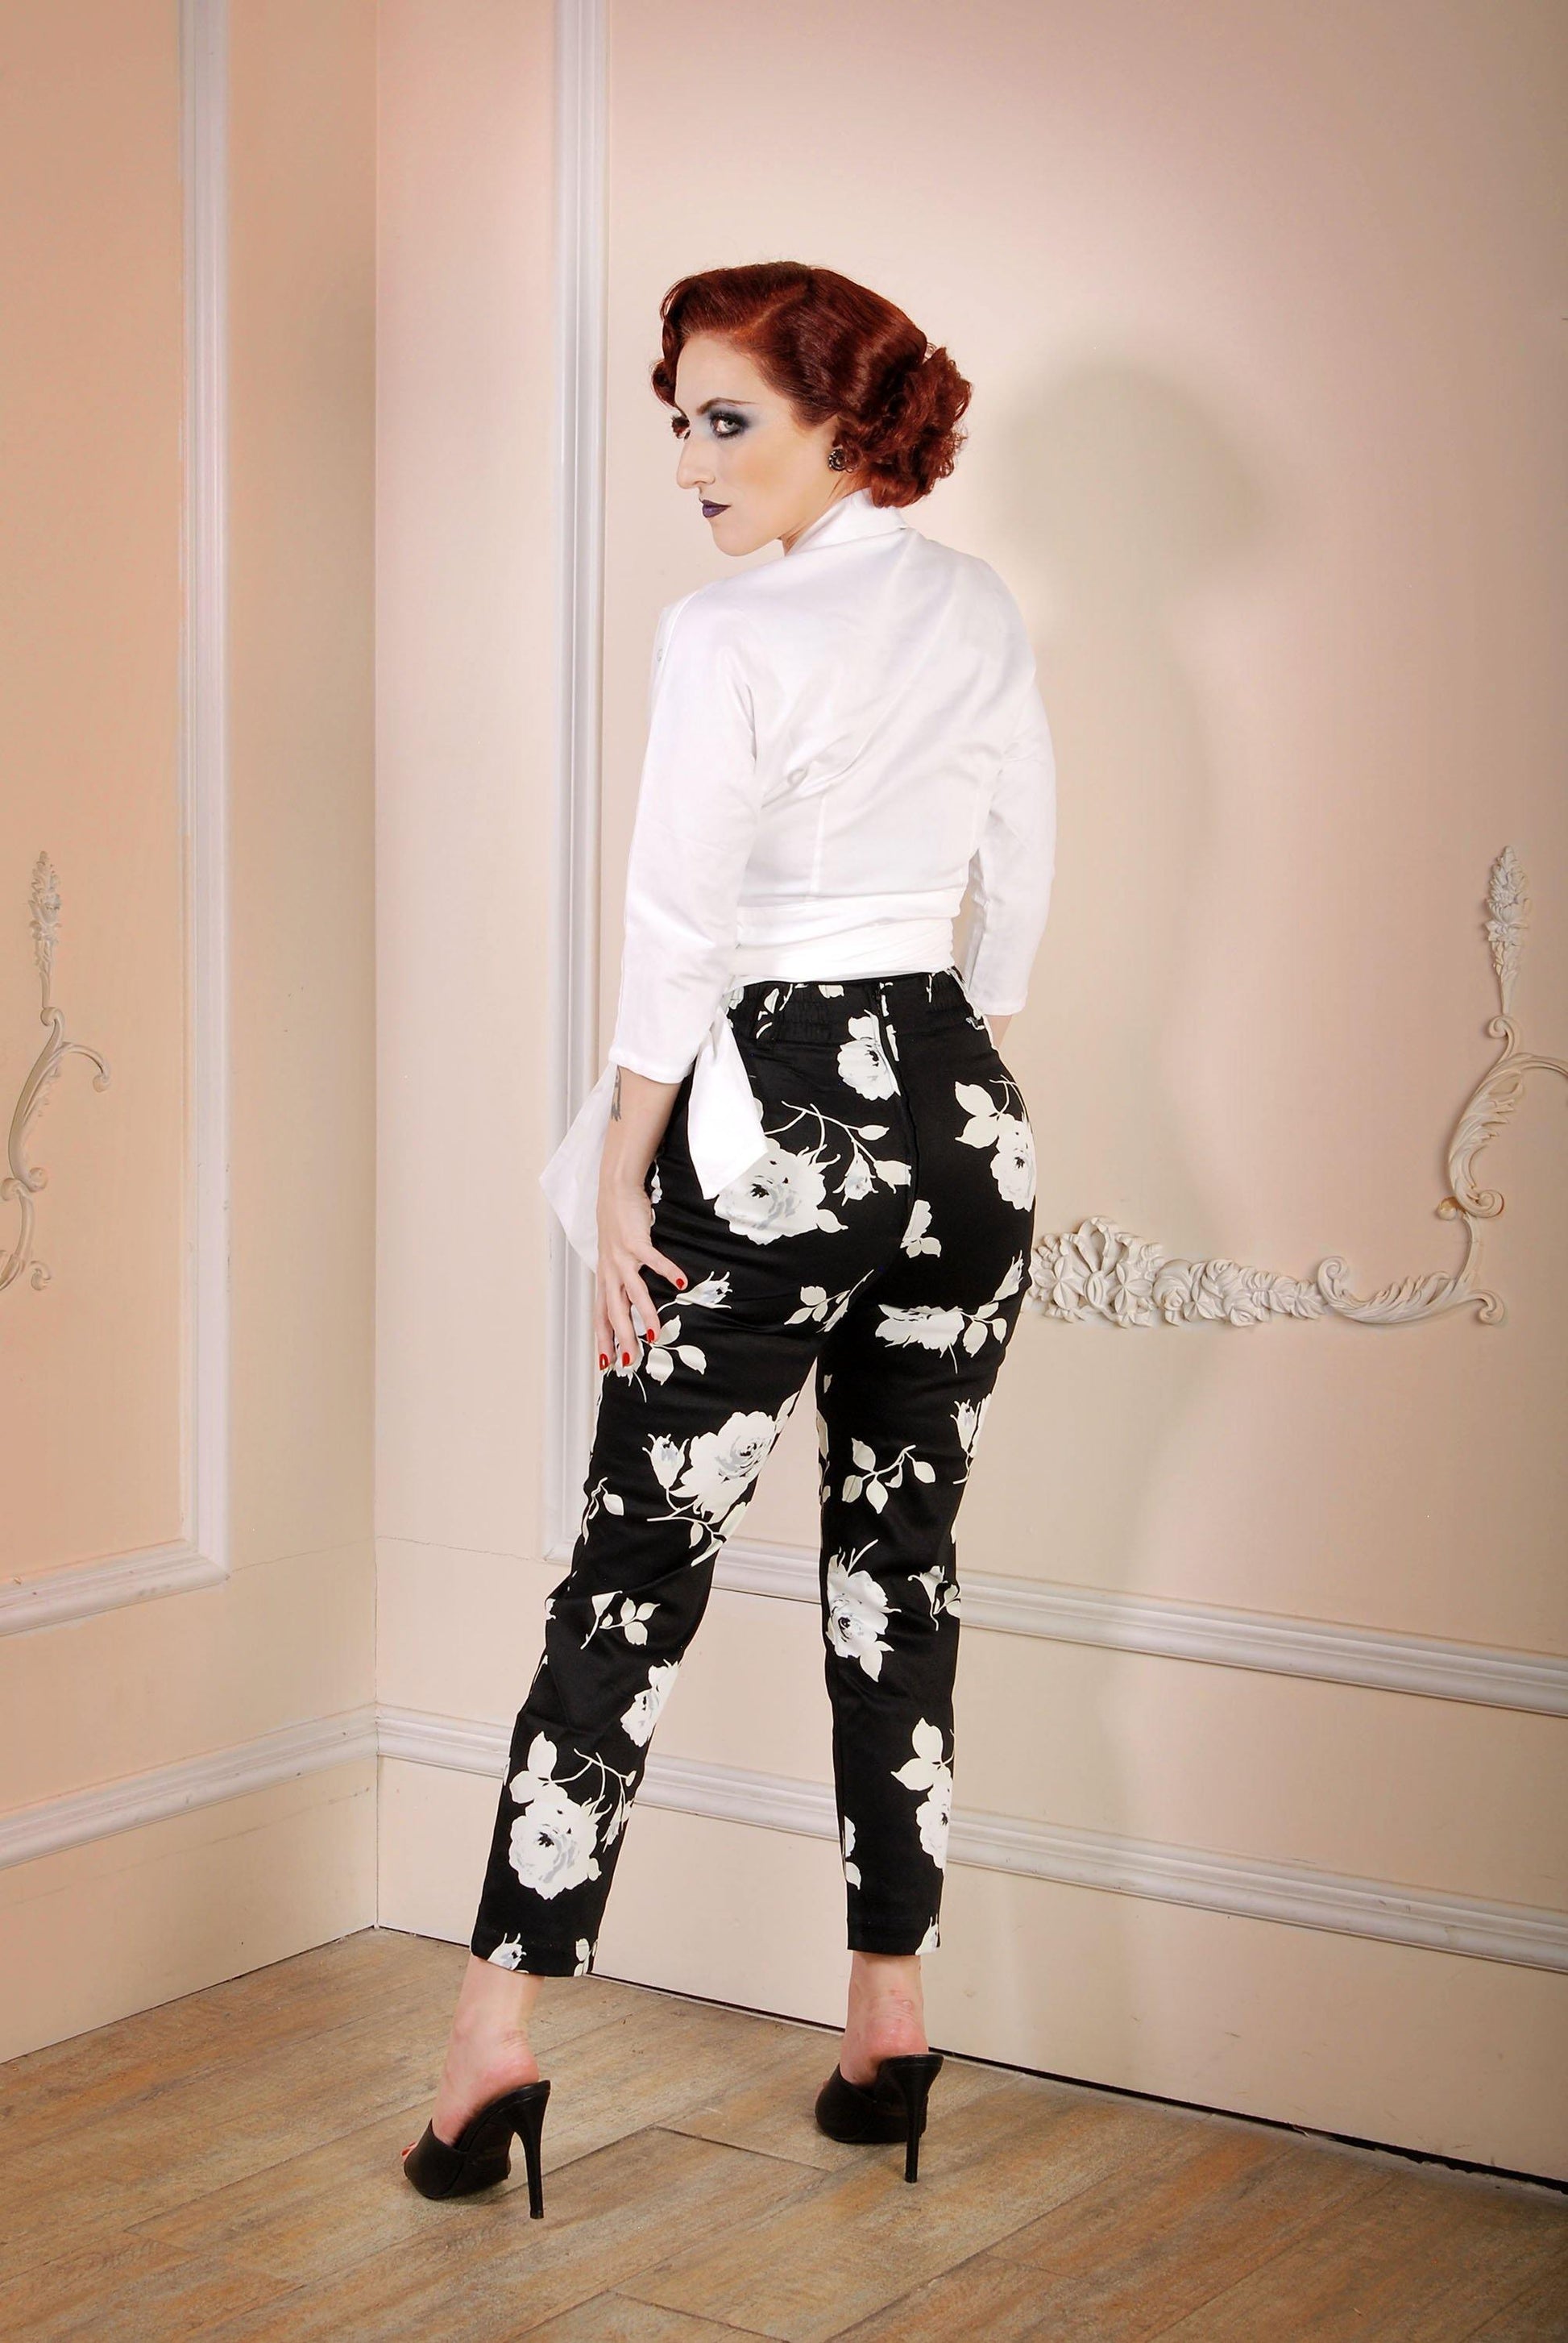 Long Sleeve Wrap Top in White Cotton Sateen | Couture for Every Body - pinupgirlclothing.com